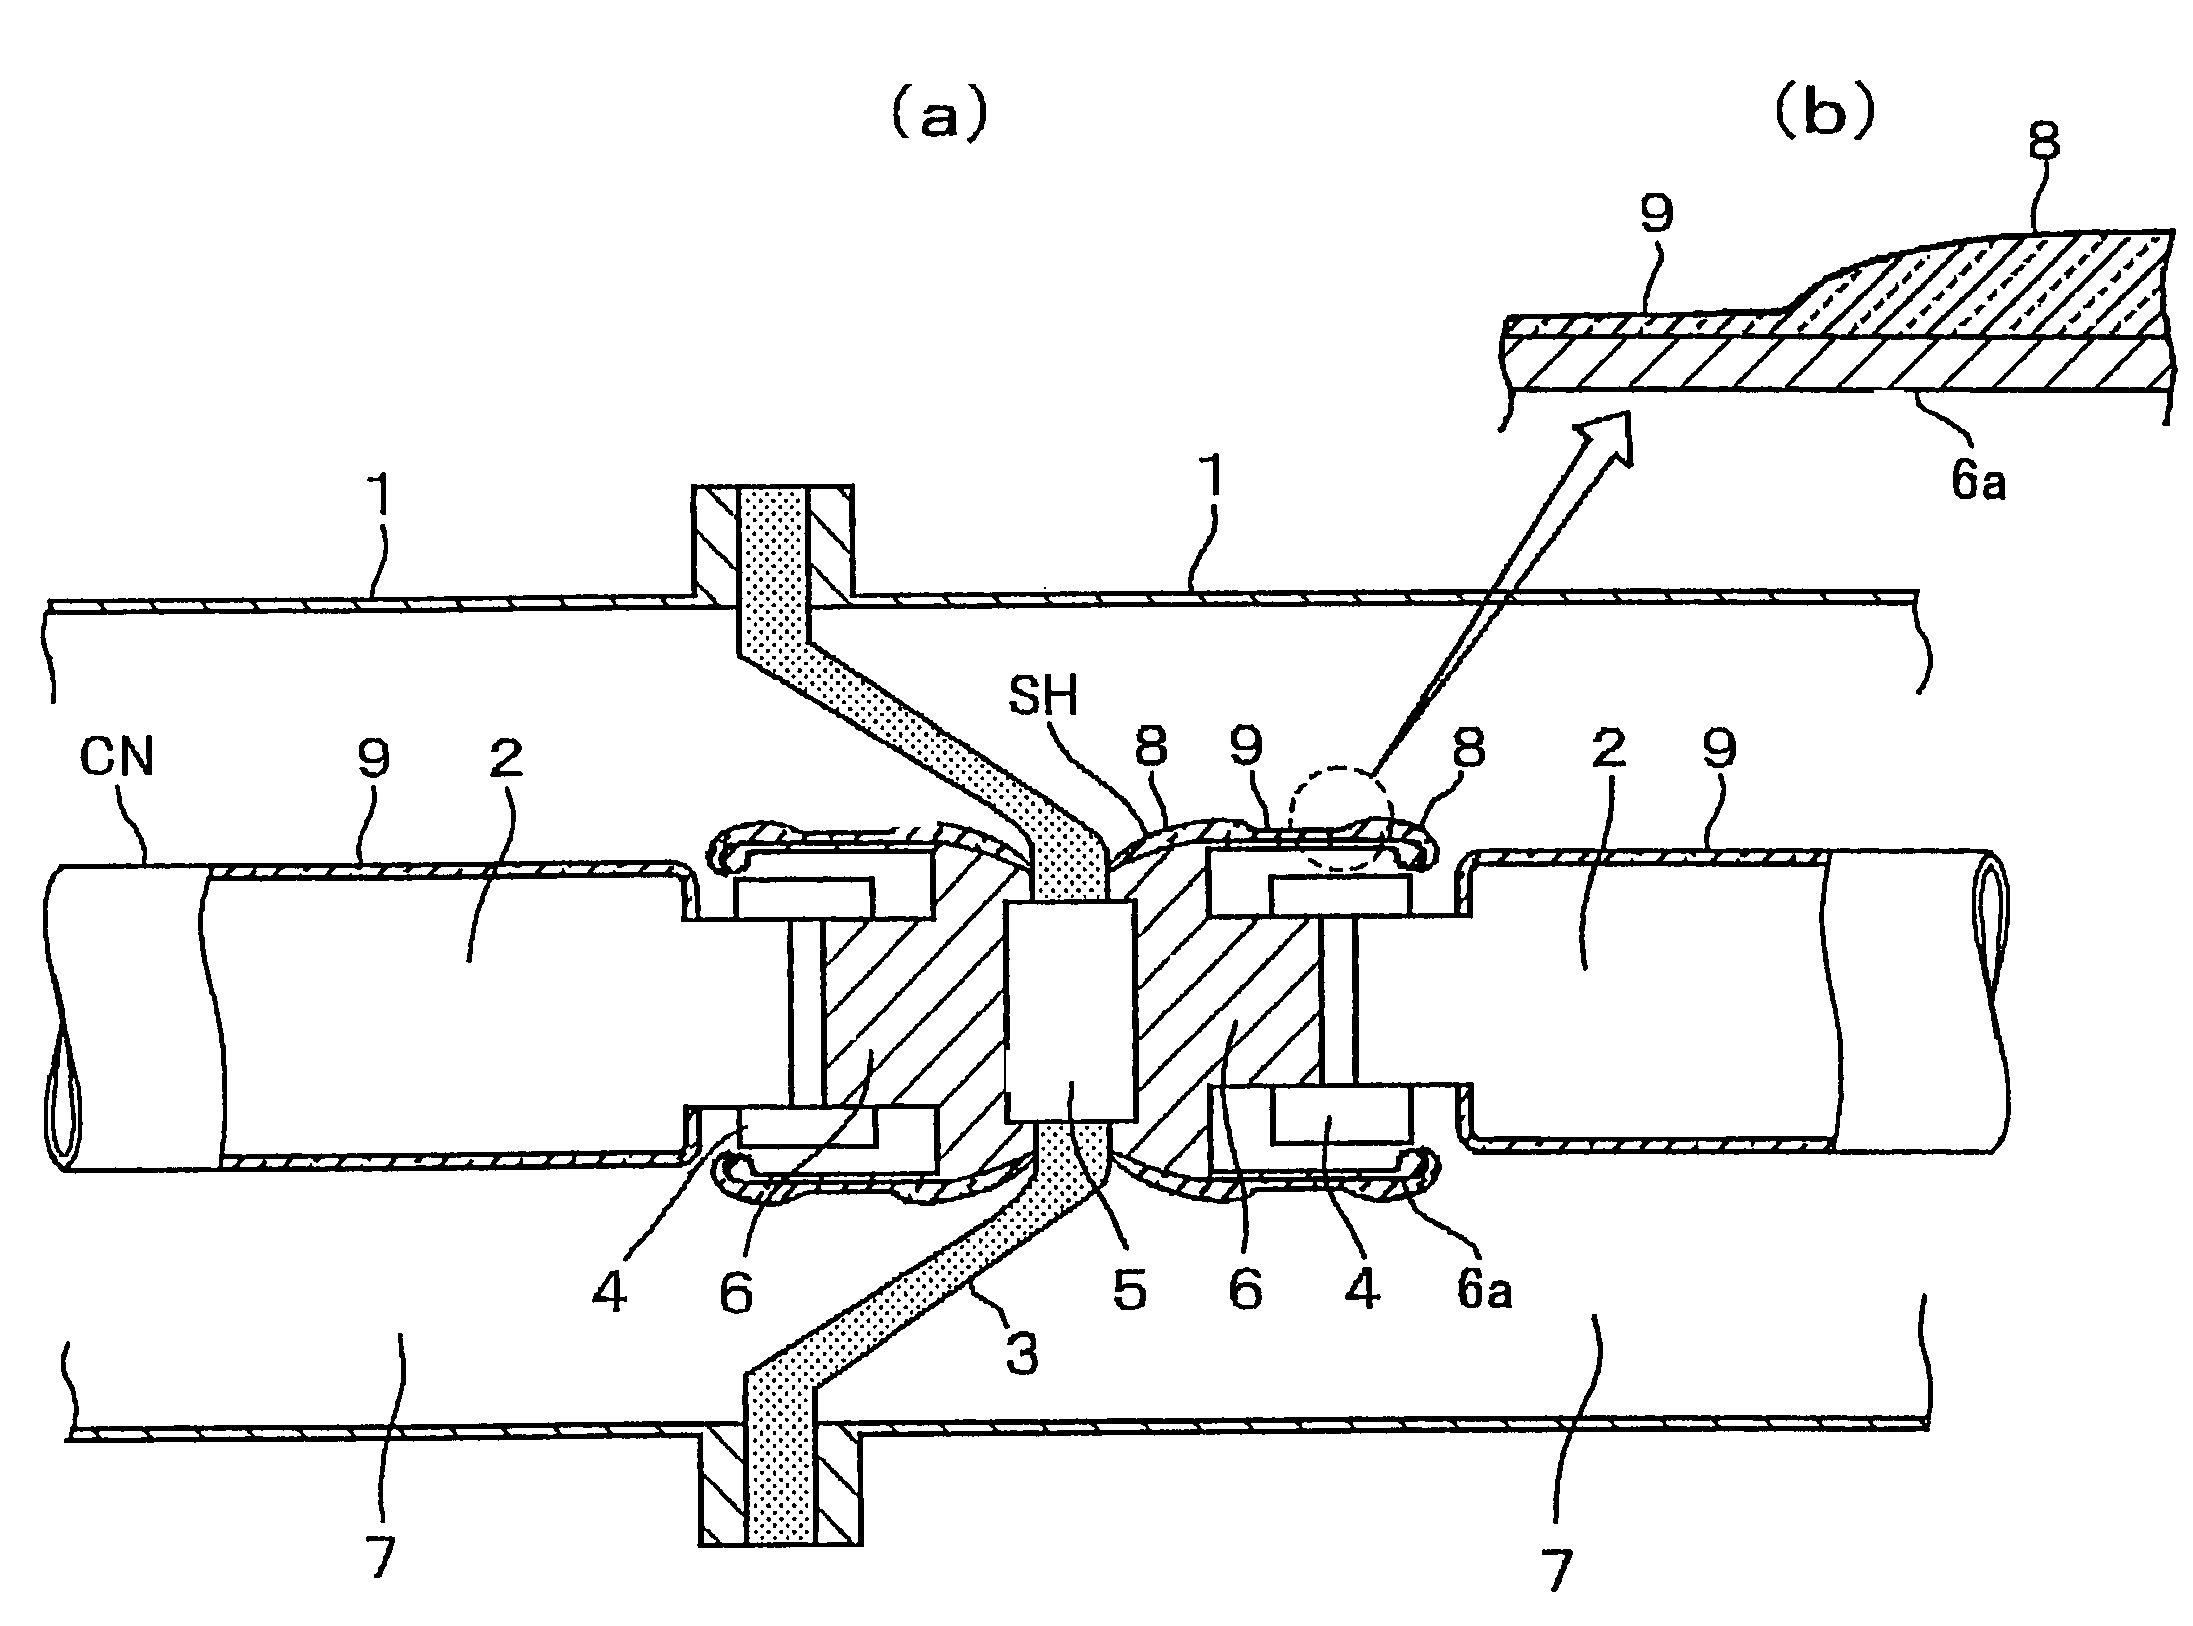 Gas-insulated equipment